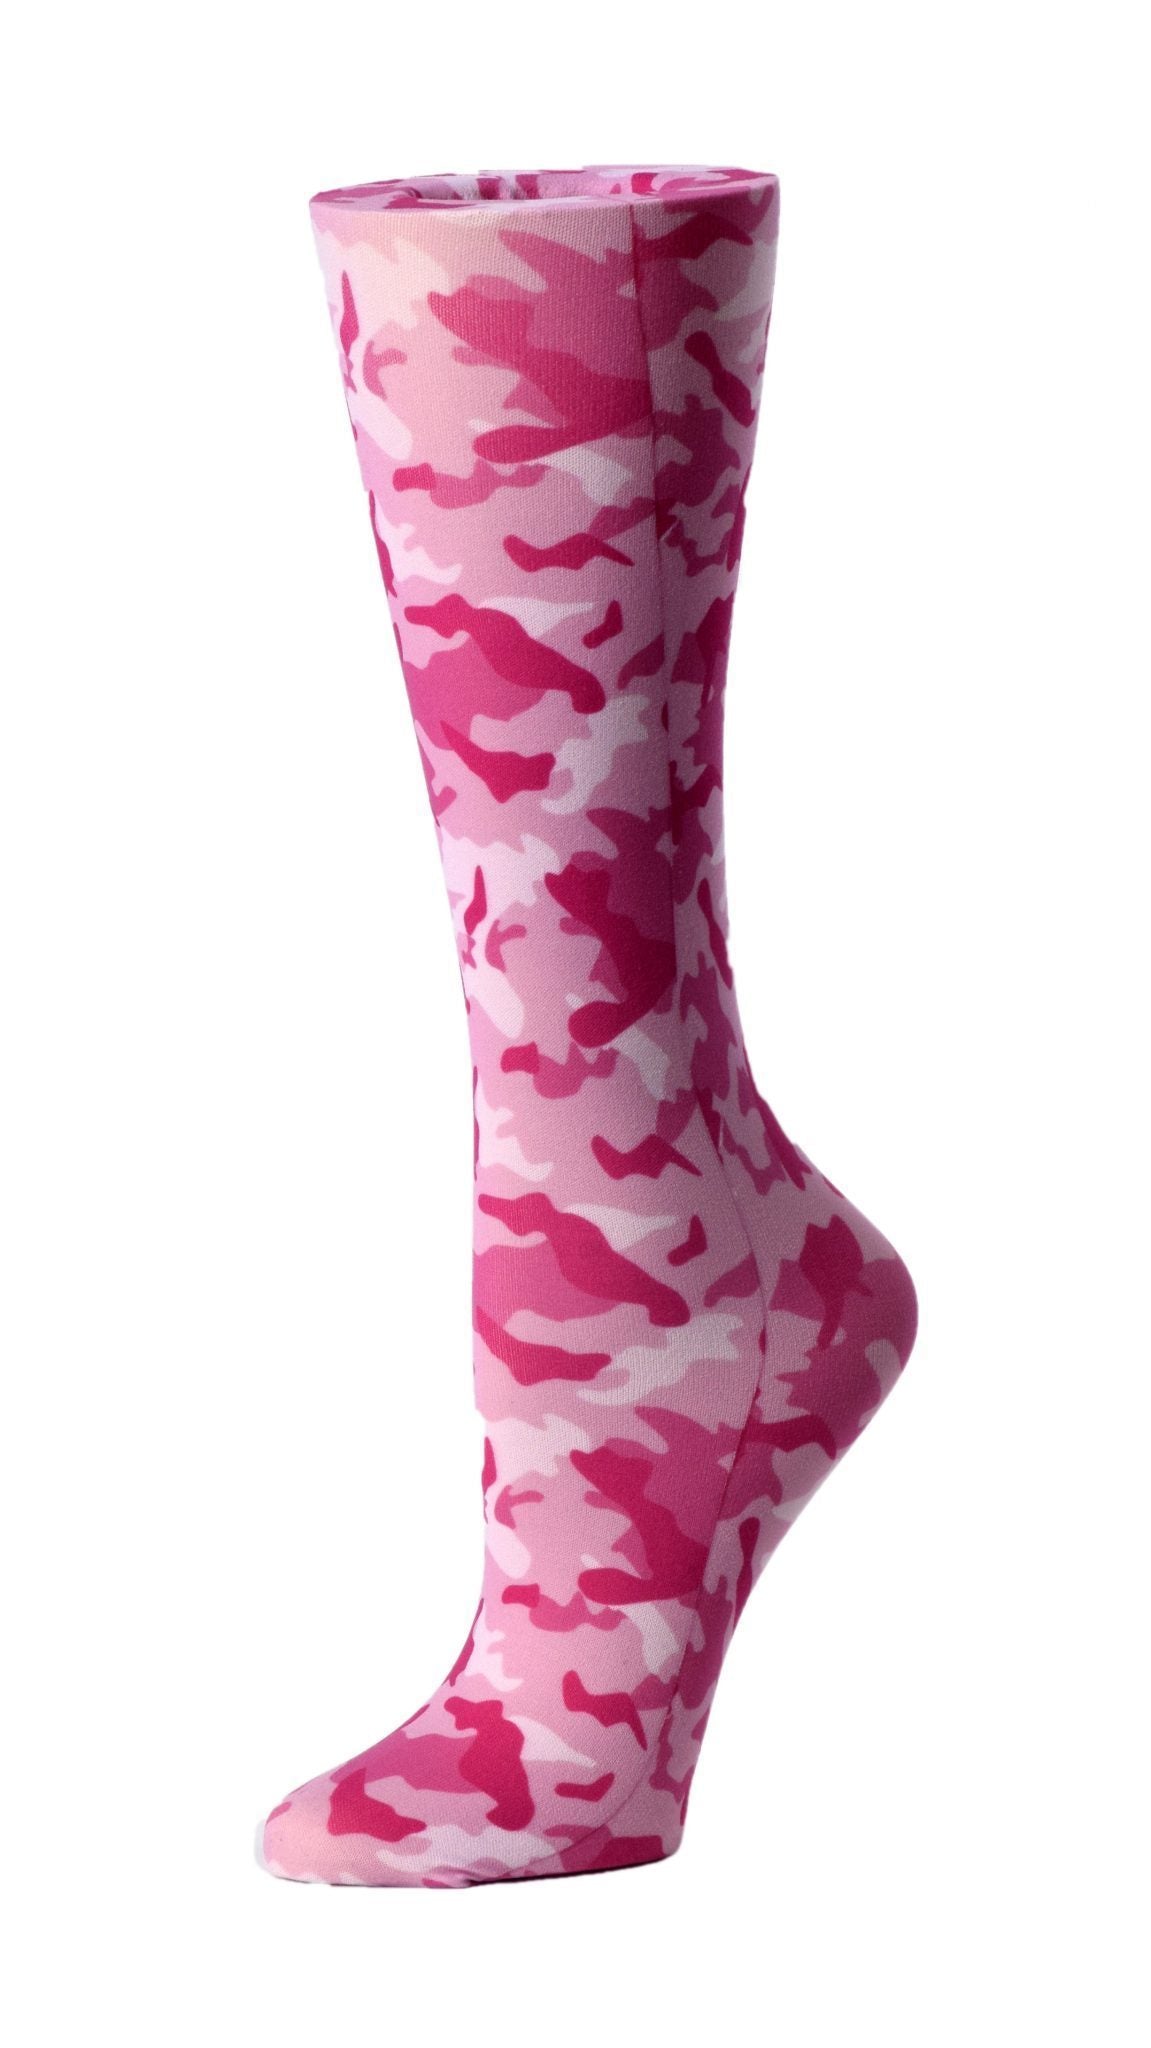 Cutieful Moderate Compression Socks 10-18 MMhg Wide Calf Knit Print Pattern Pink Camo at Parker's Clothing and Shoes.